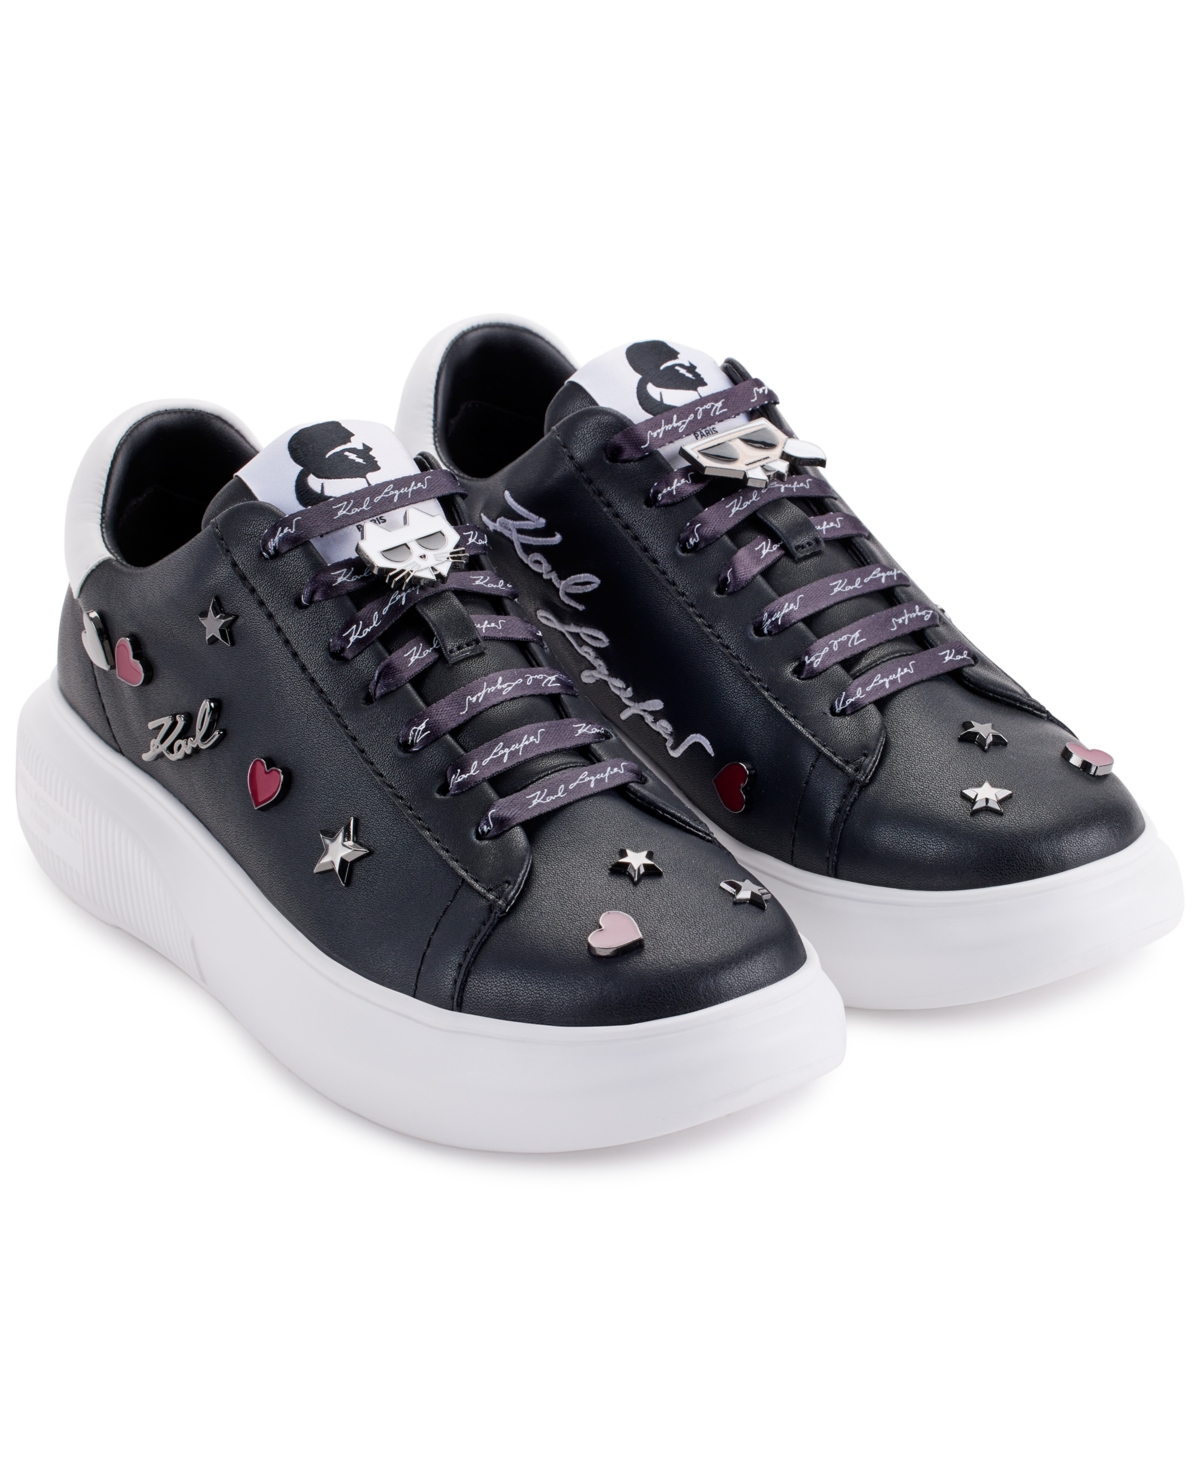 Karl Lagerfeld Kenna Lace-up Low-top Embellished Sneakers In Blk,bright White